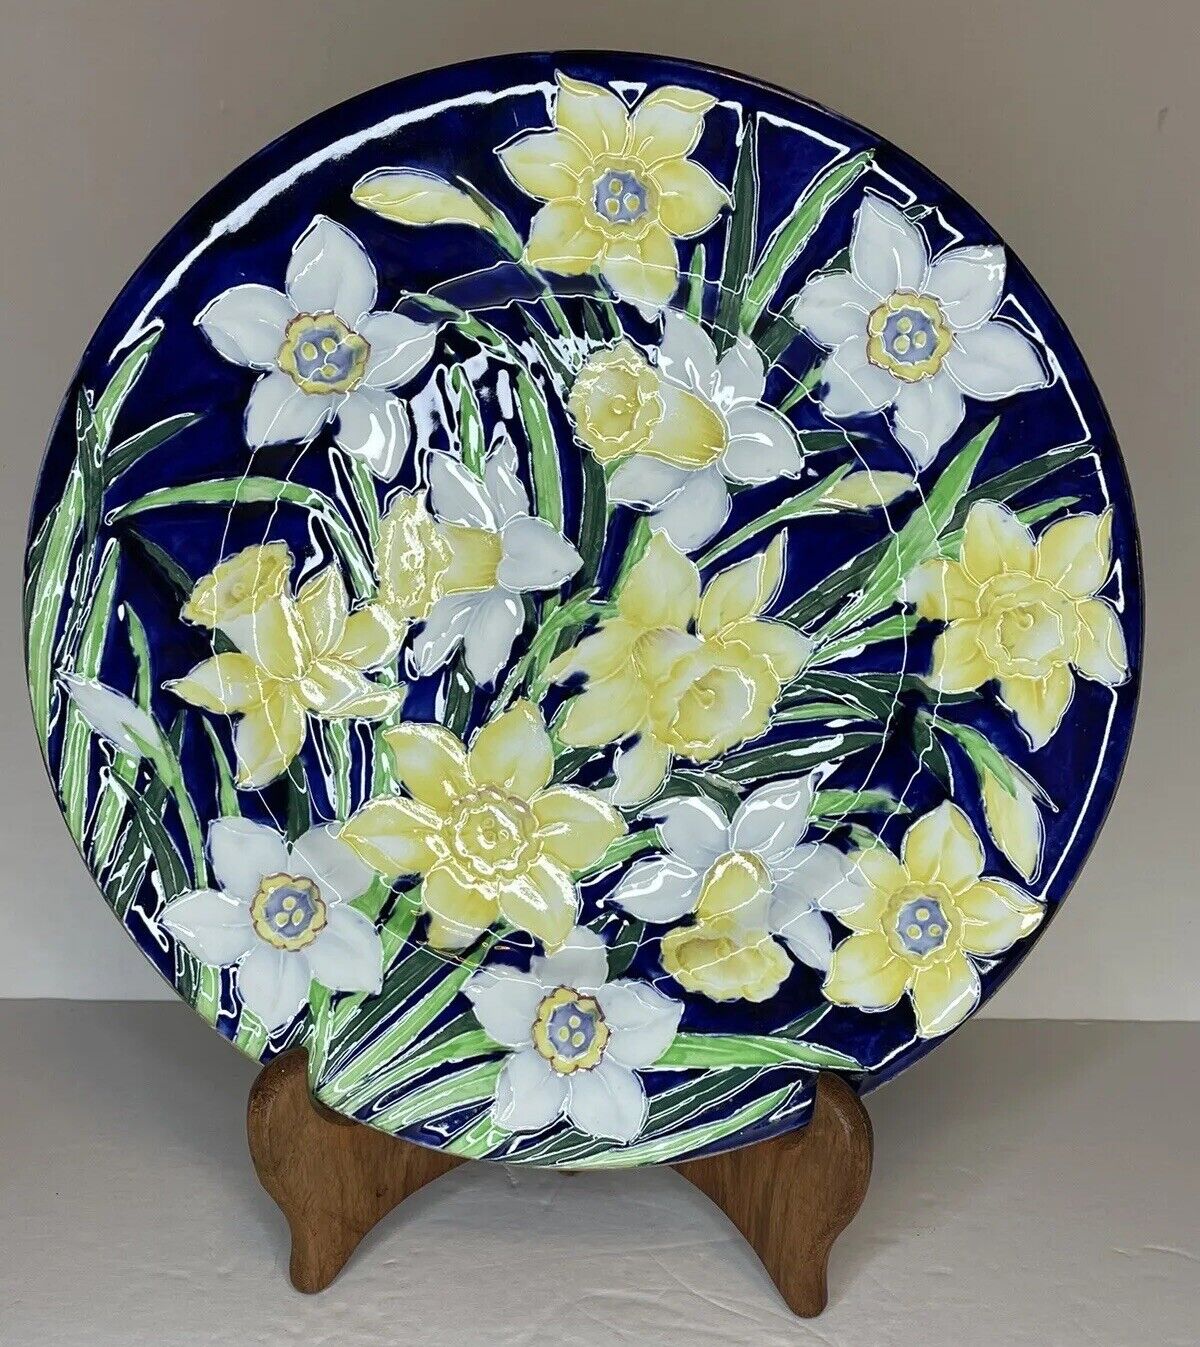 Vintage MALING POTTERY (England) 1940s “Daffodils” Embossed Hand Painted Plate